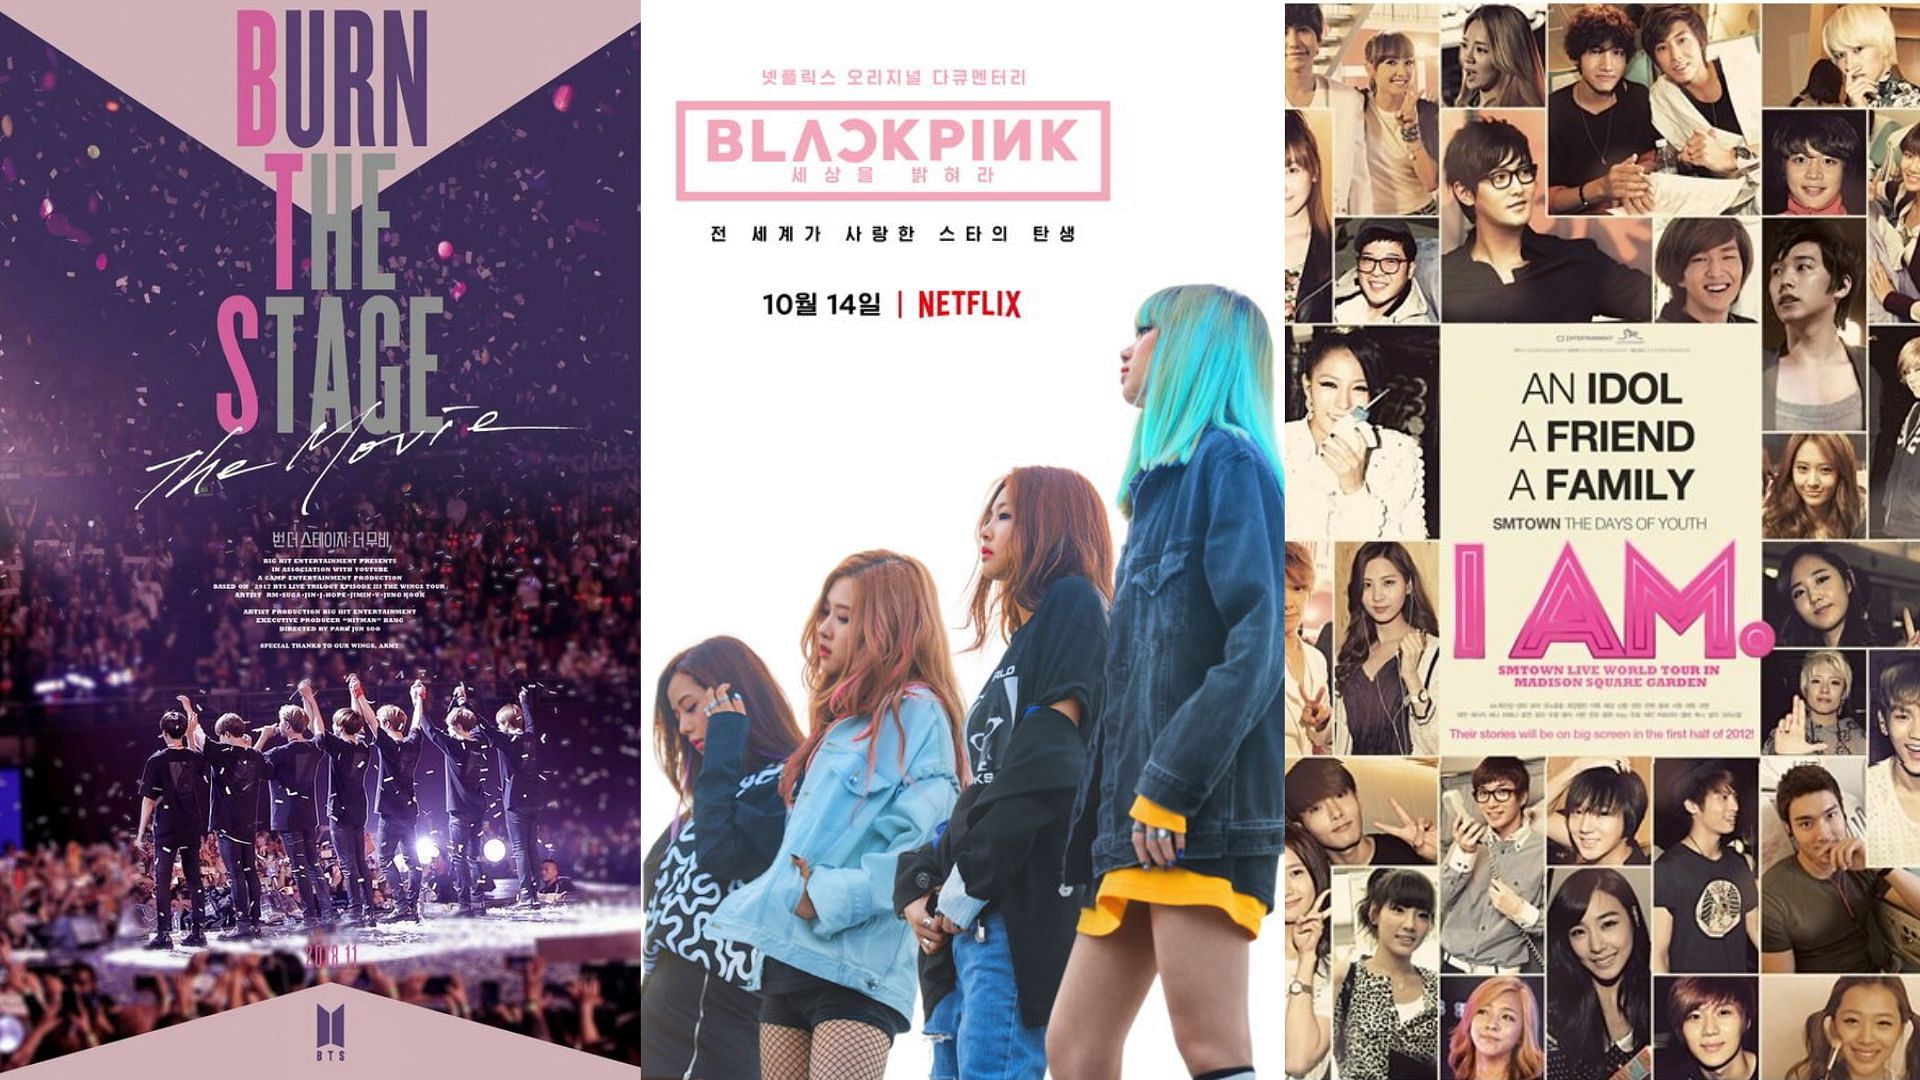 BTS, BLACKPINK, and SMTOWN have put out K-pop documentaries that are worth a watch for fans around the world. (Images via Twitter/ @parishi_bts, @mavis_verneel, and @theseoulstory)